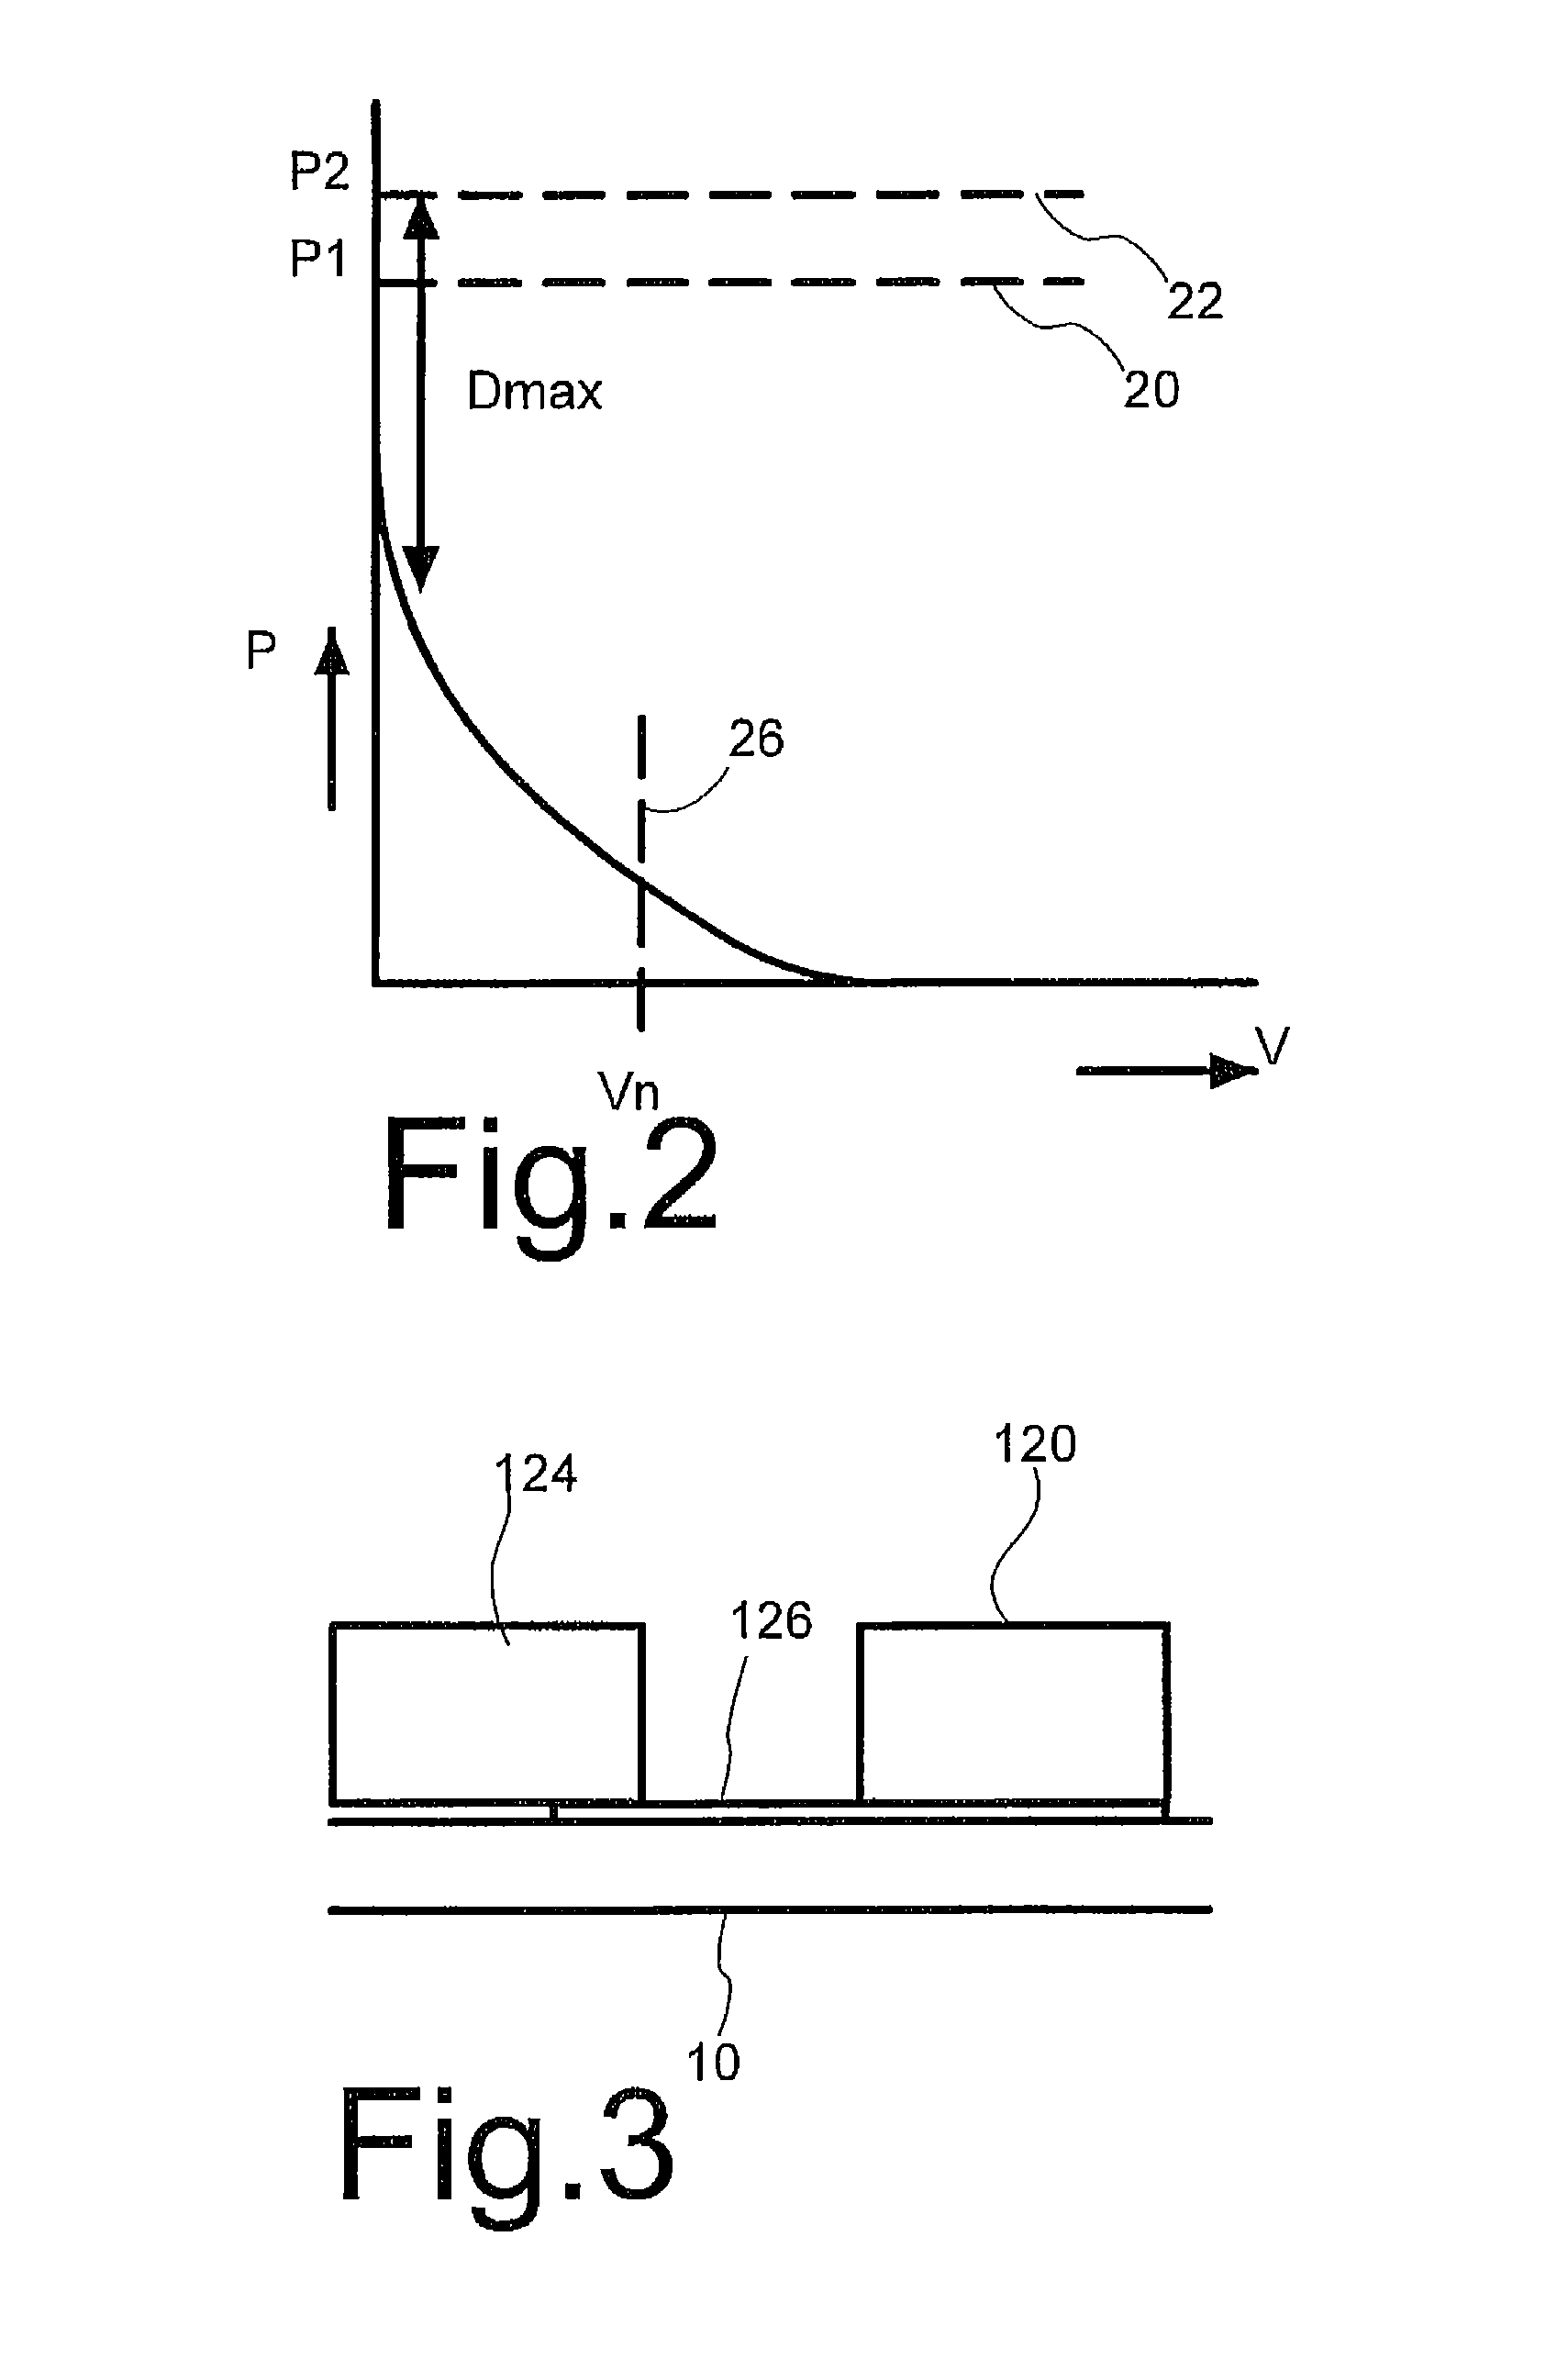 Intrinsically safe display device with an array of LEDs